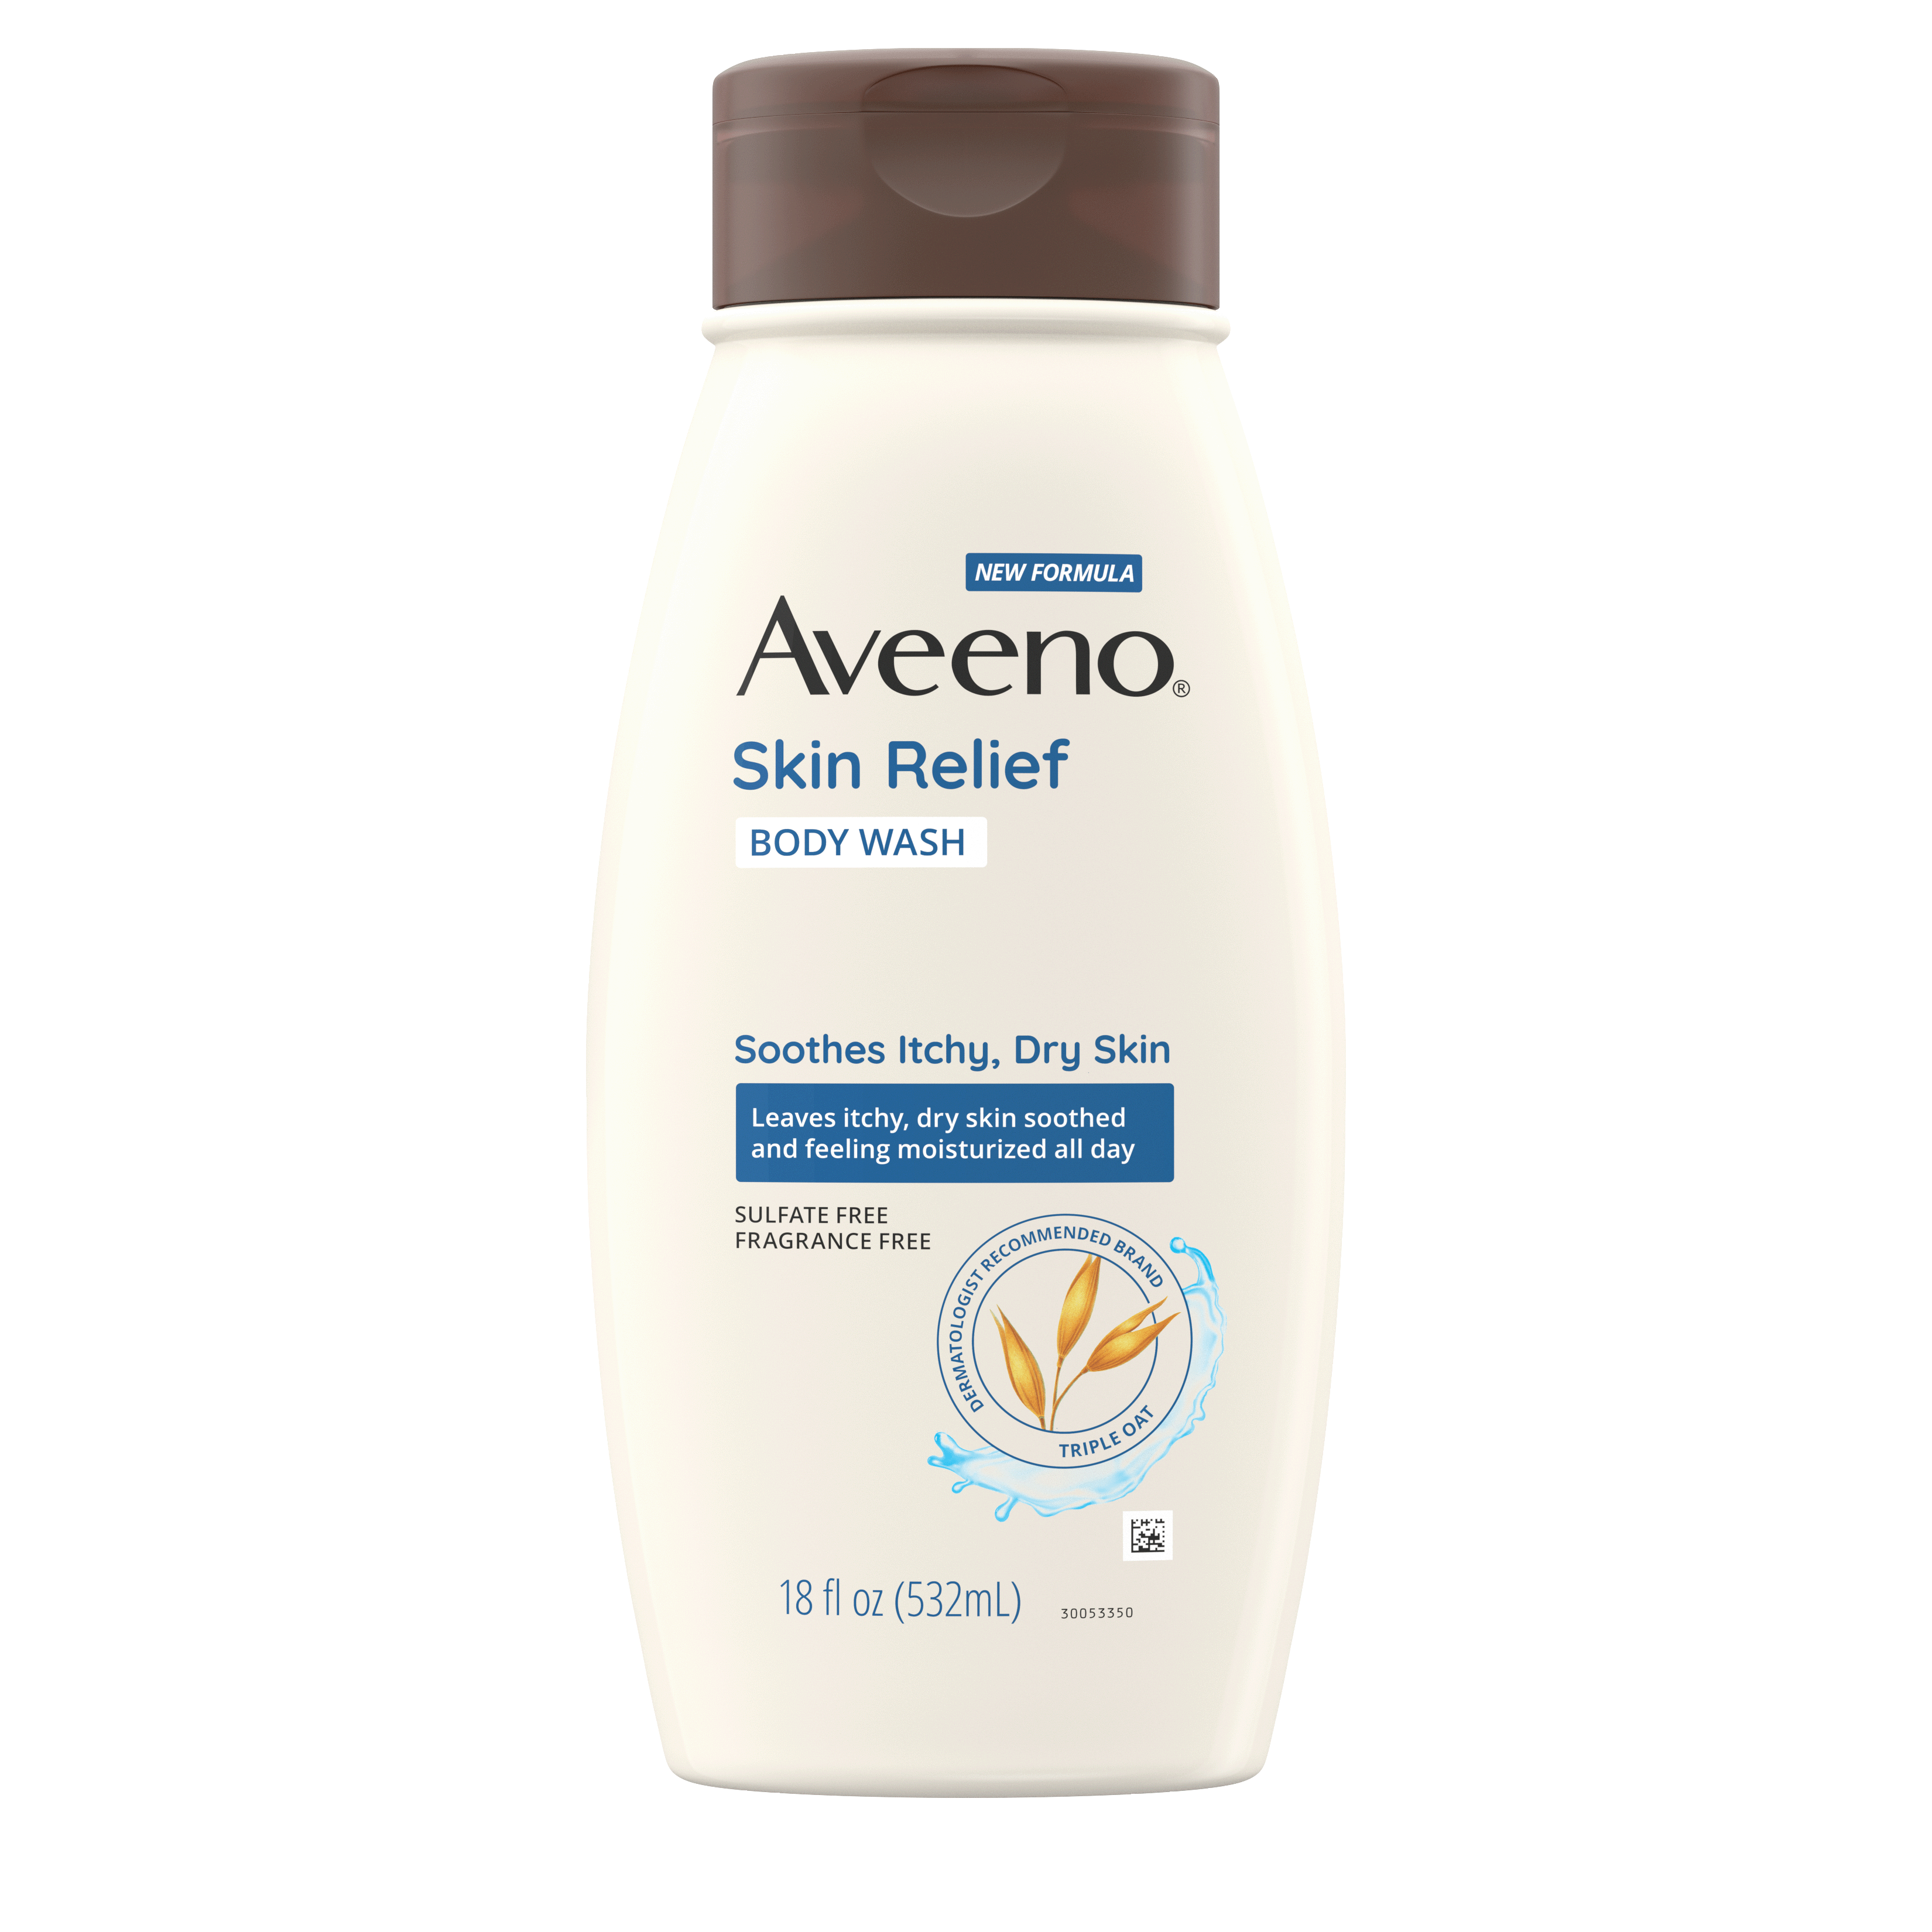 Aveeno Skin Relief Unscented Body Wash for Sensitive Skin Front